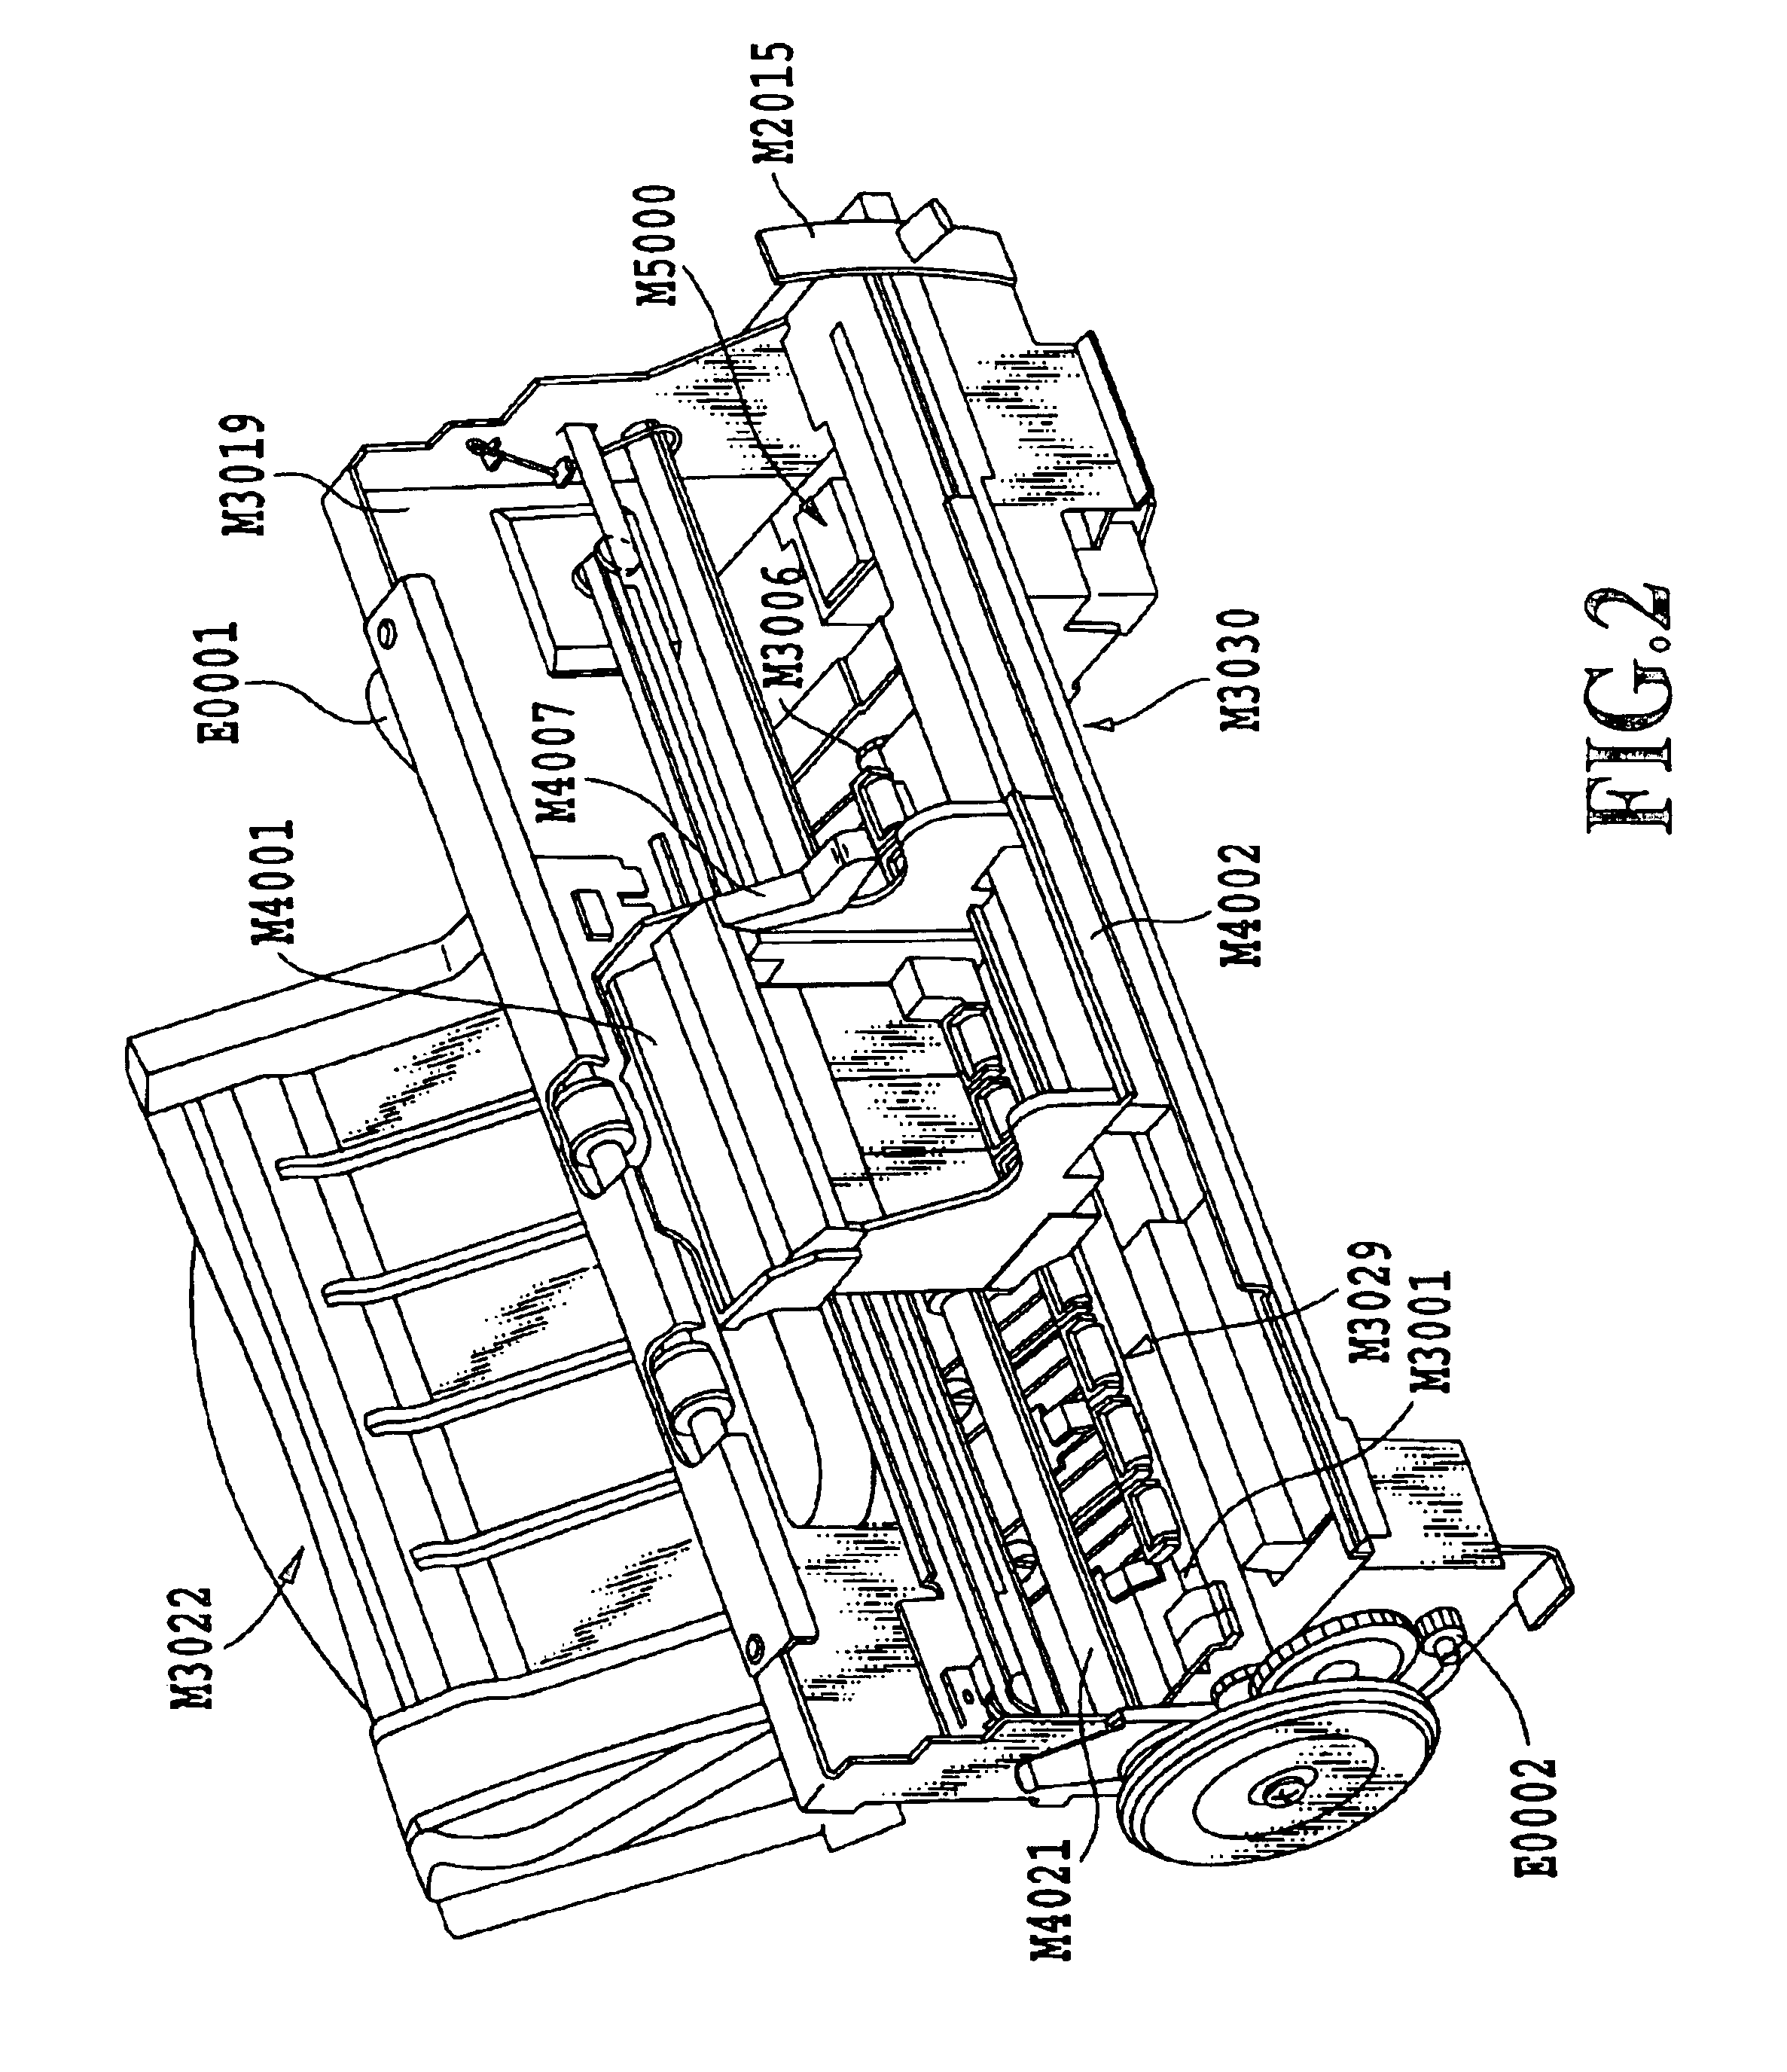 Ink jet printing apparatus and ink jet printing method for forming an image on a print medium